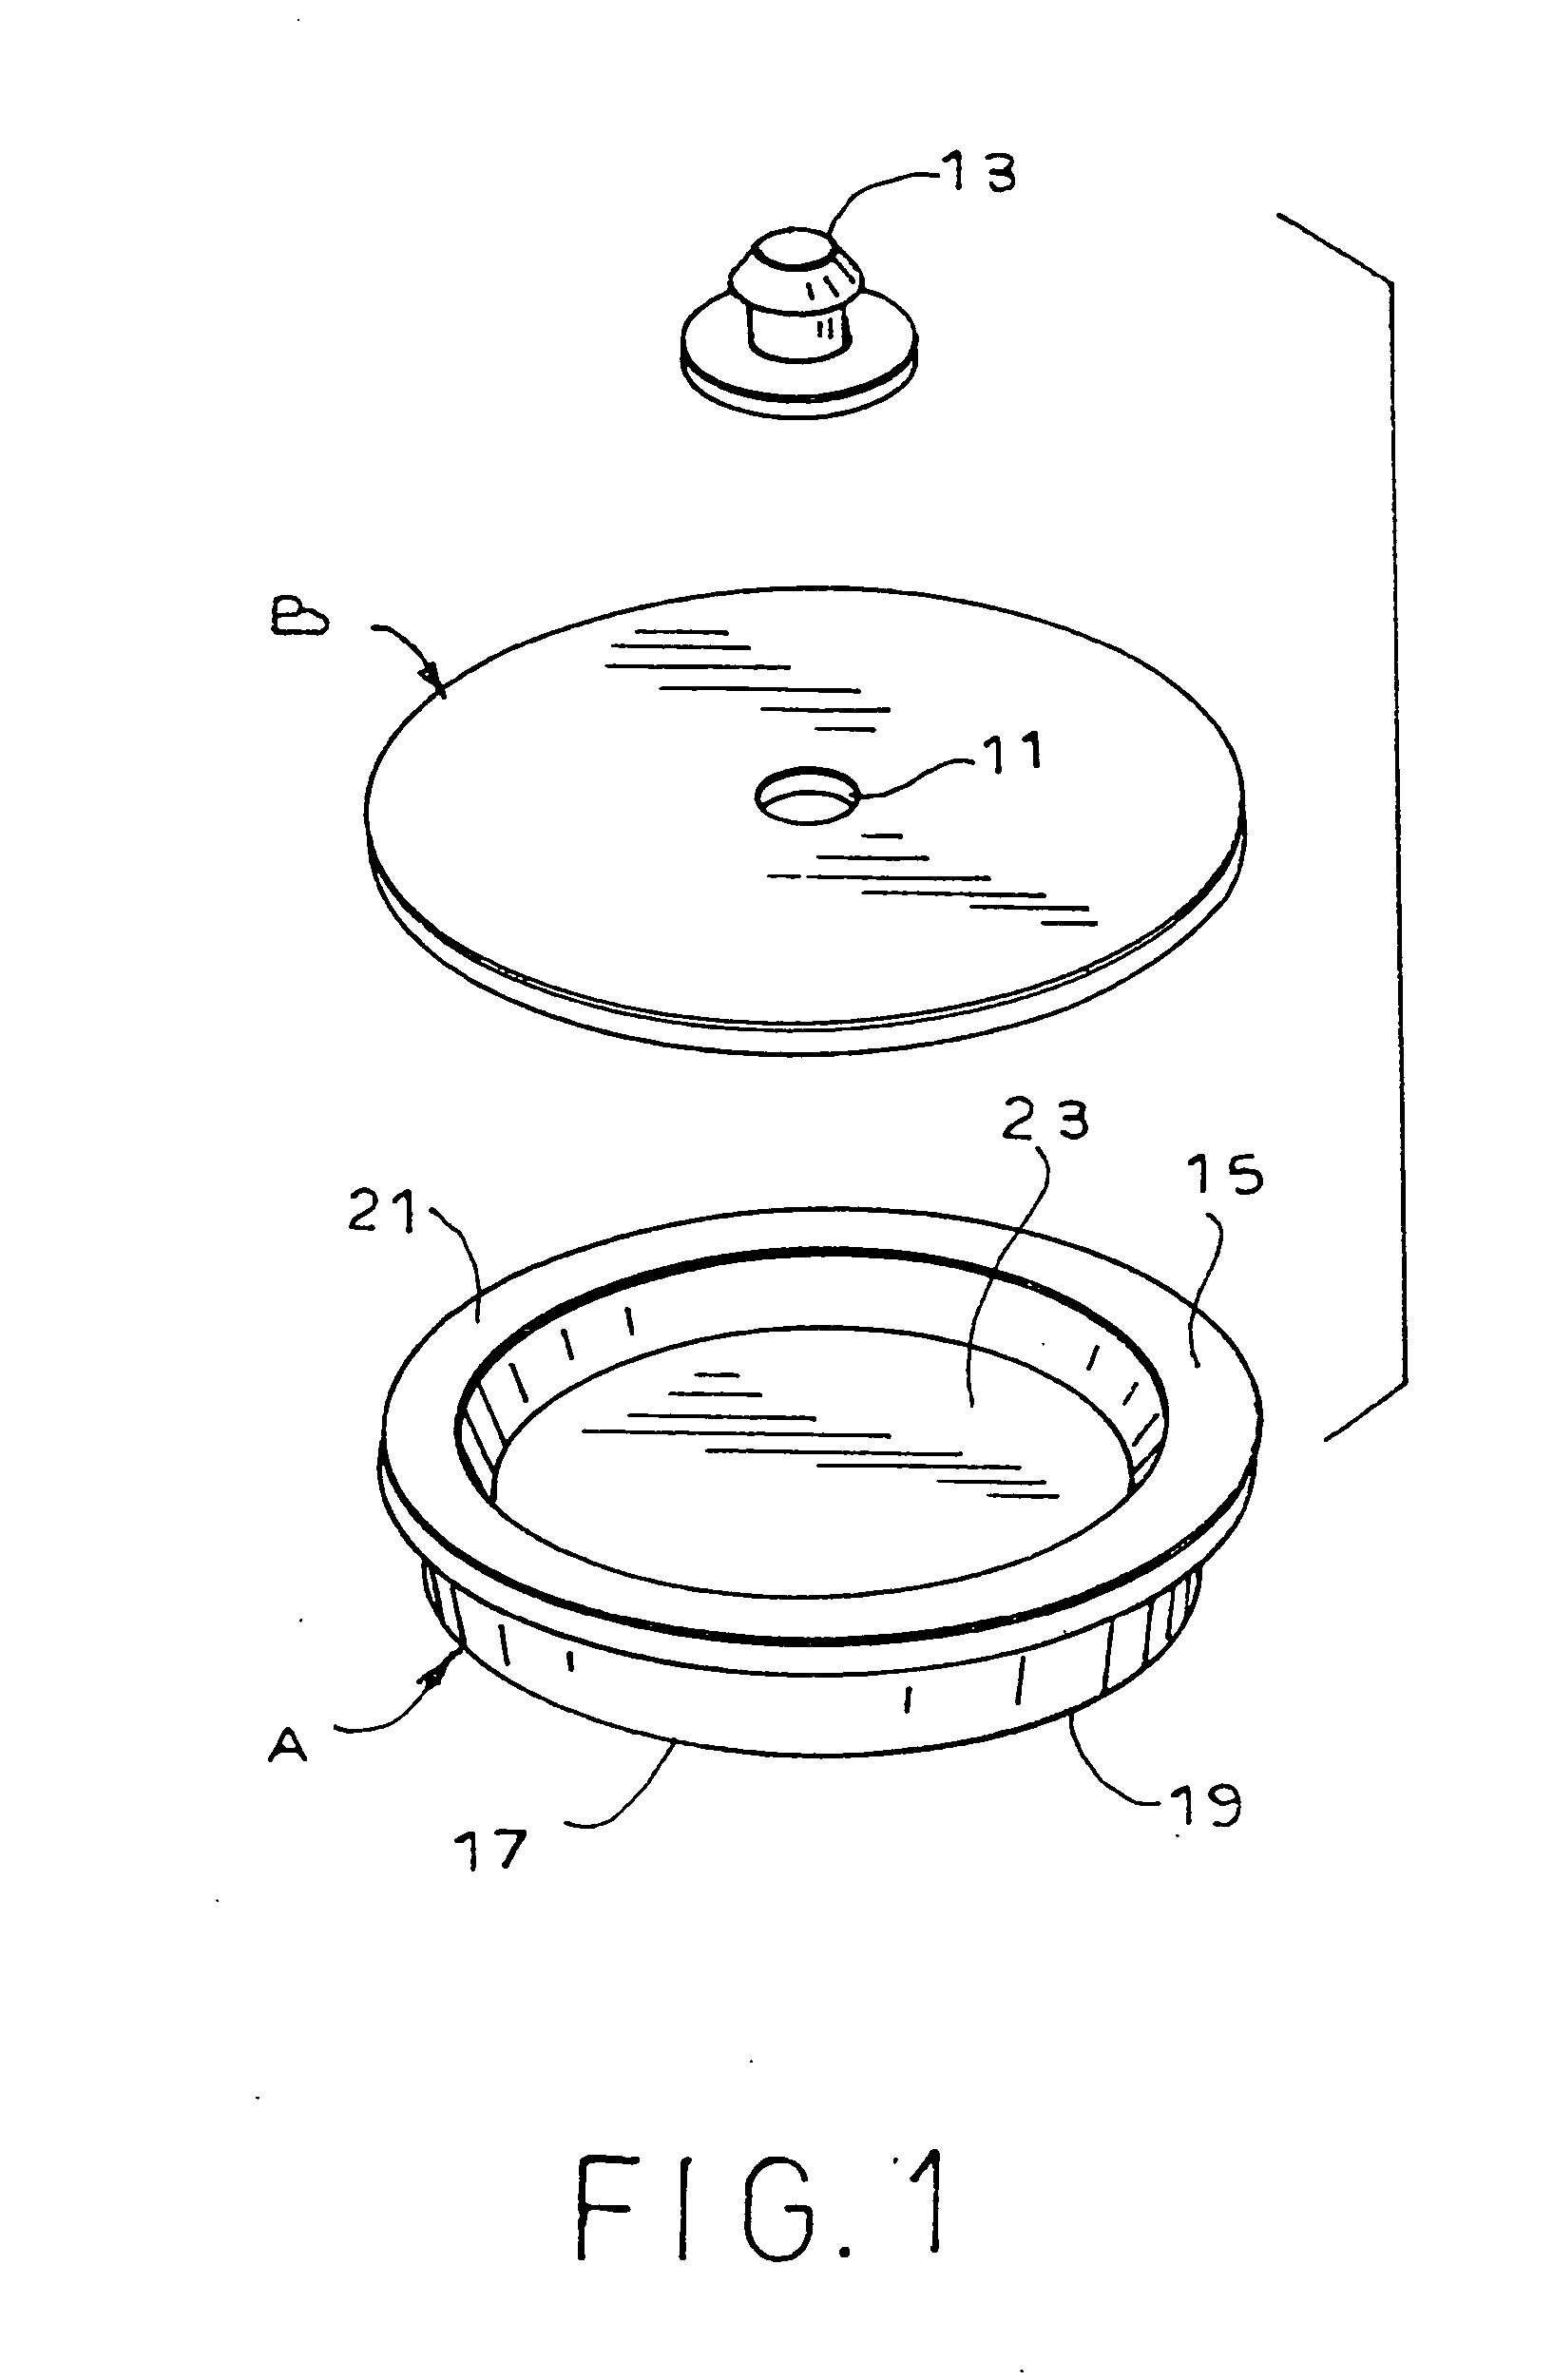 Controlled evacuation ostomy device with external seal